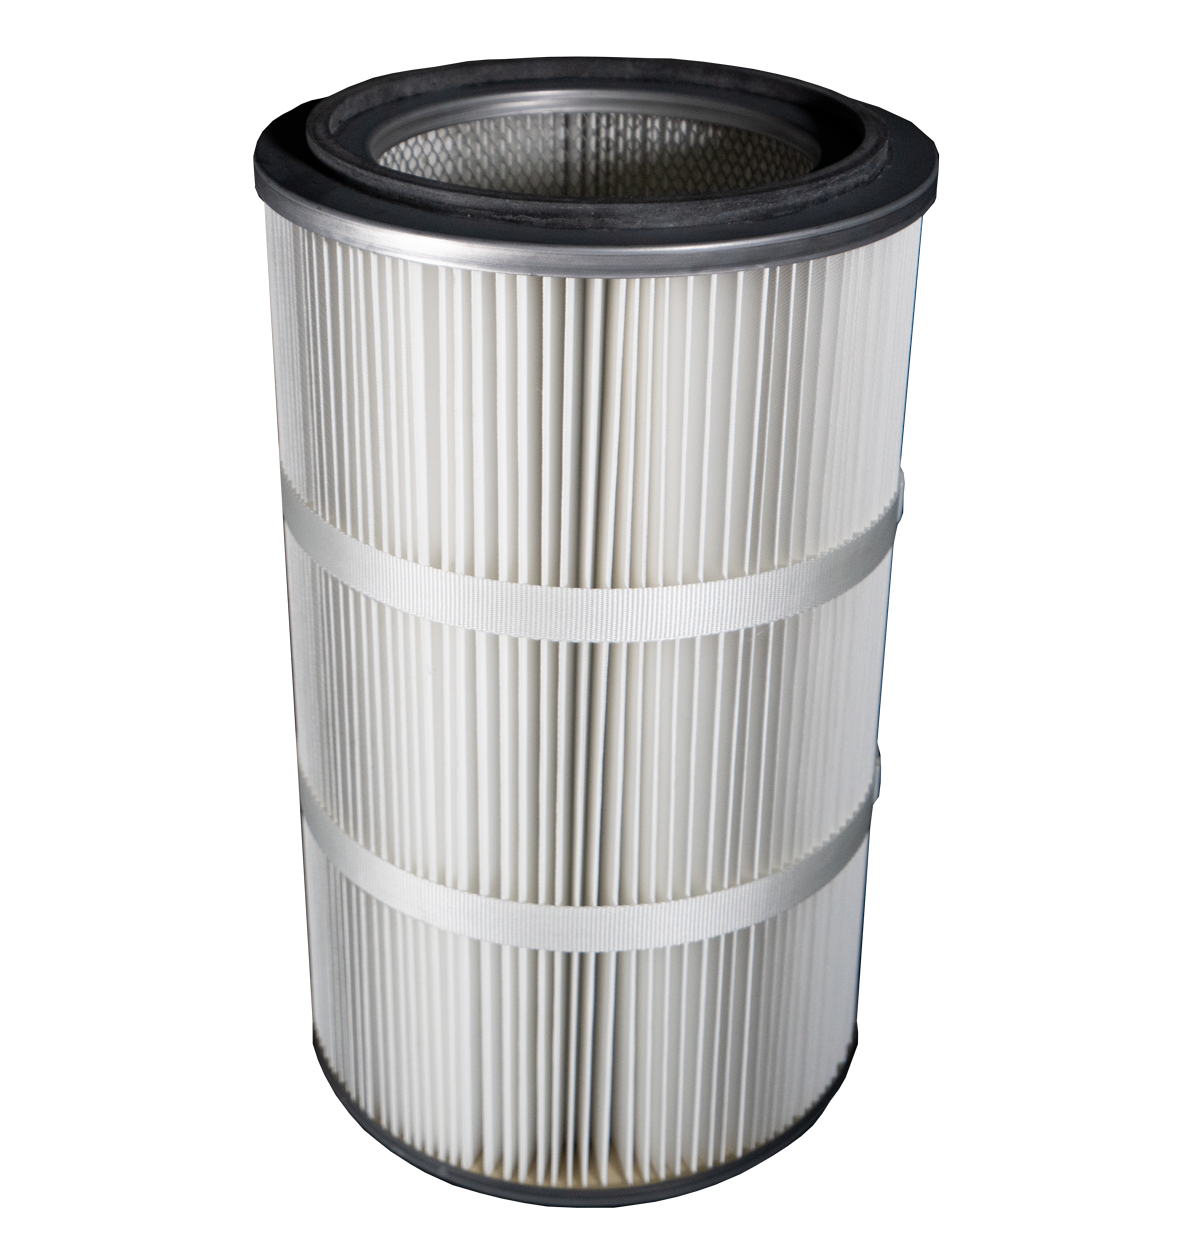 Spunbond Shorty replacement dust collector filter